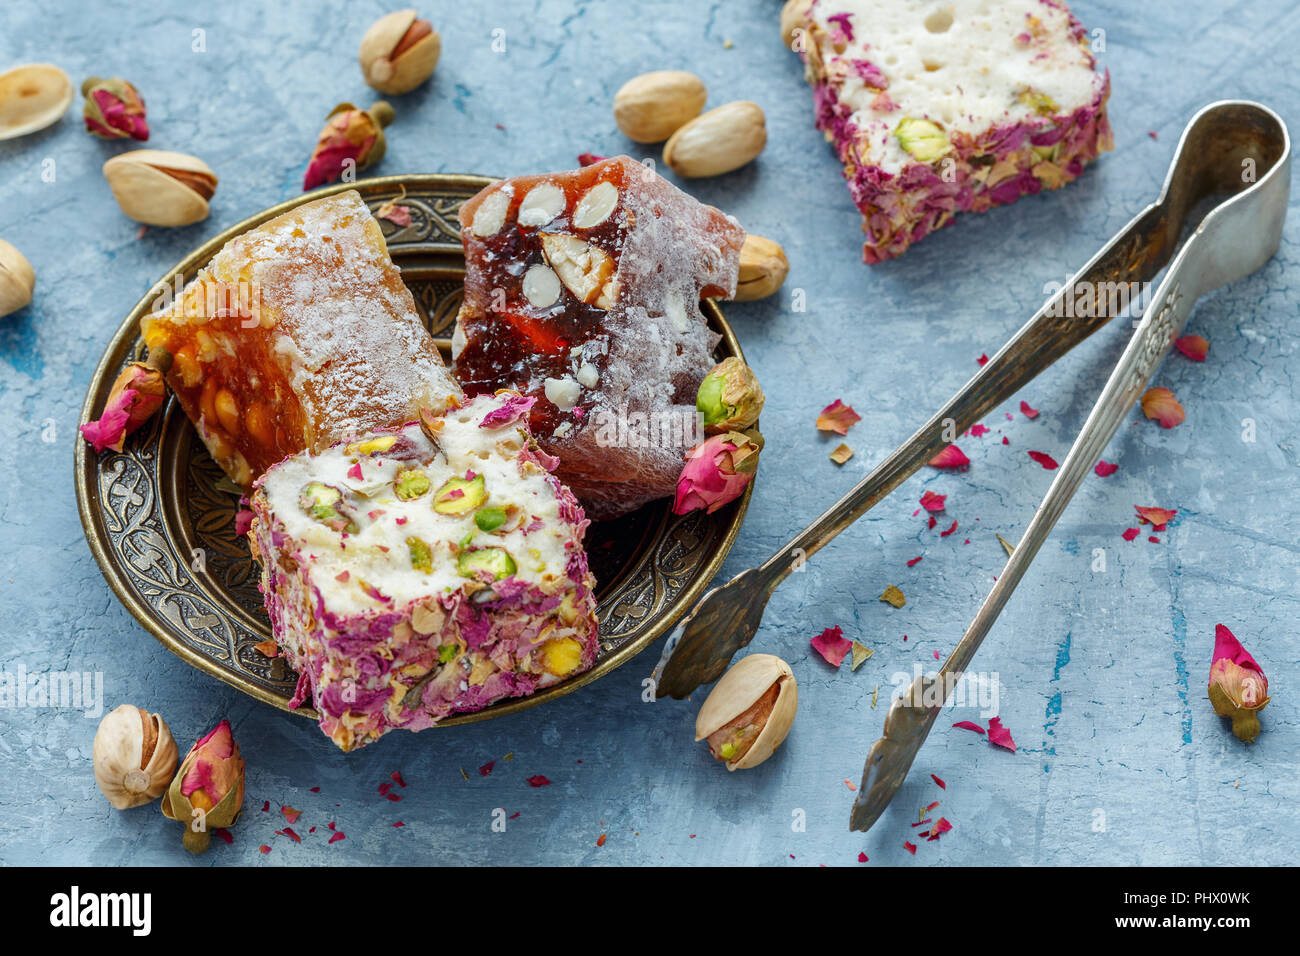 Delicious colorful Turkish delights. Stock Photo